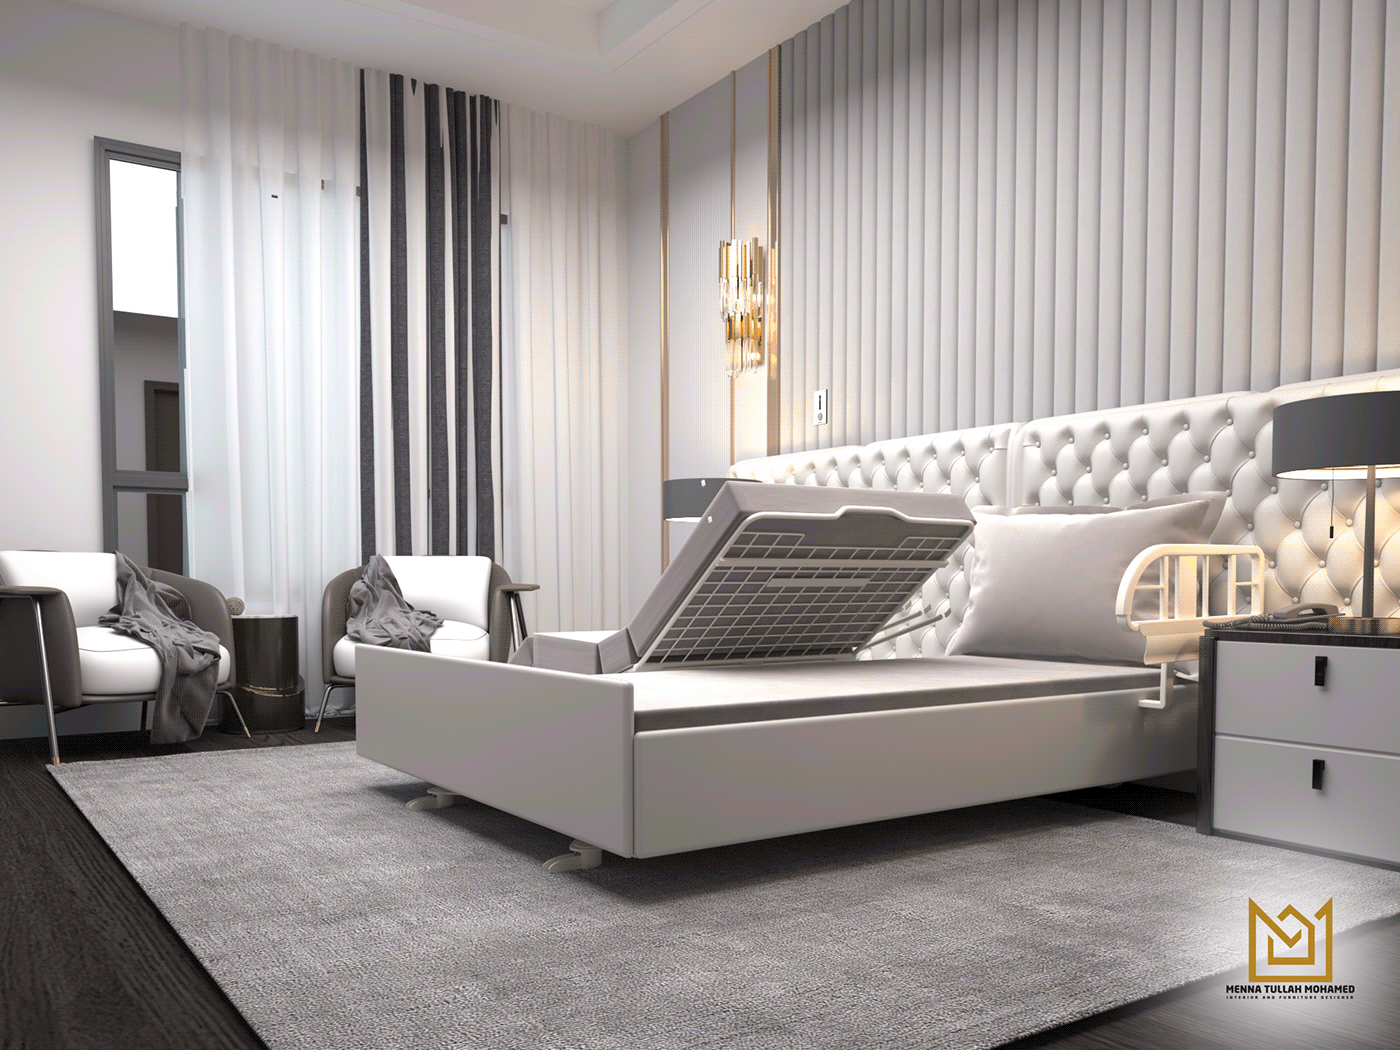 3ds max architecture interior design  modern People with special needs rehabilitation Render resort visualization vray